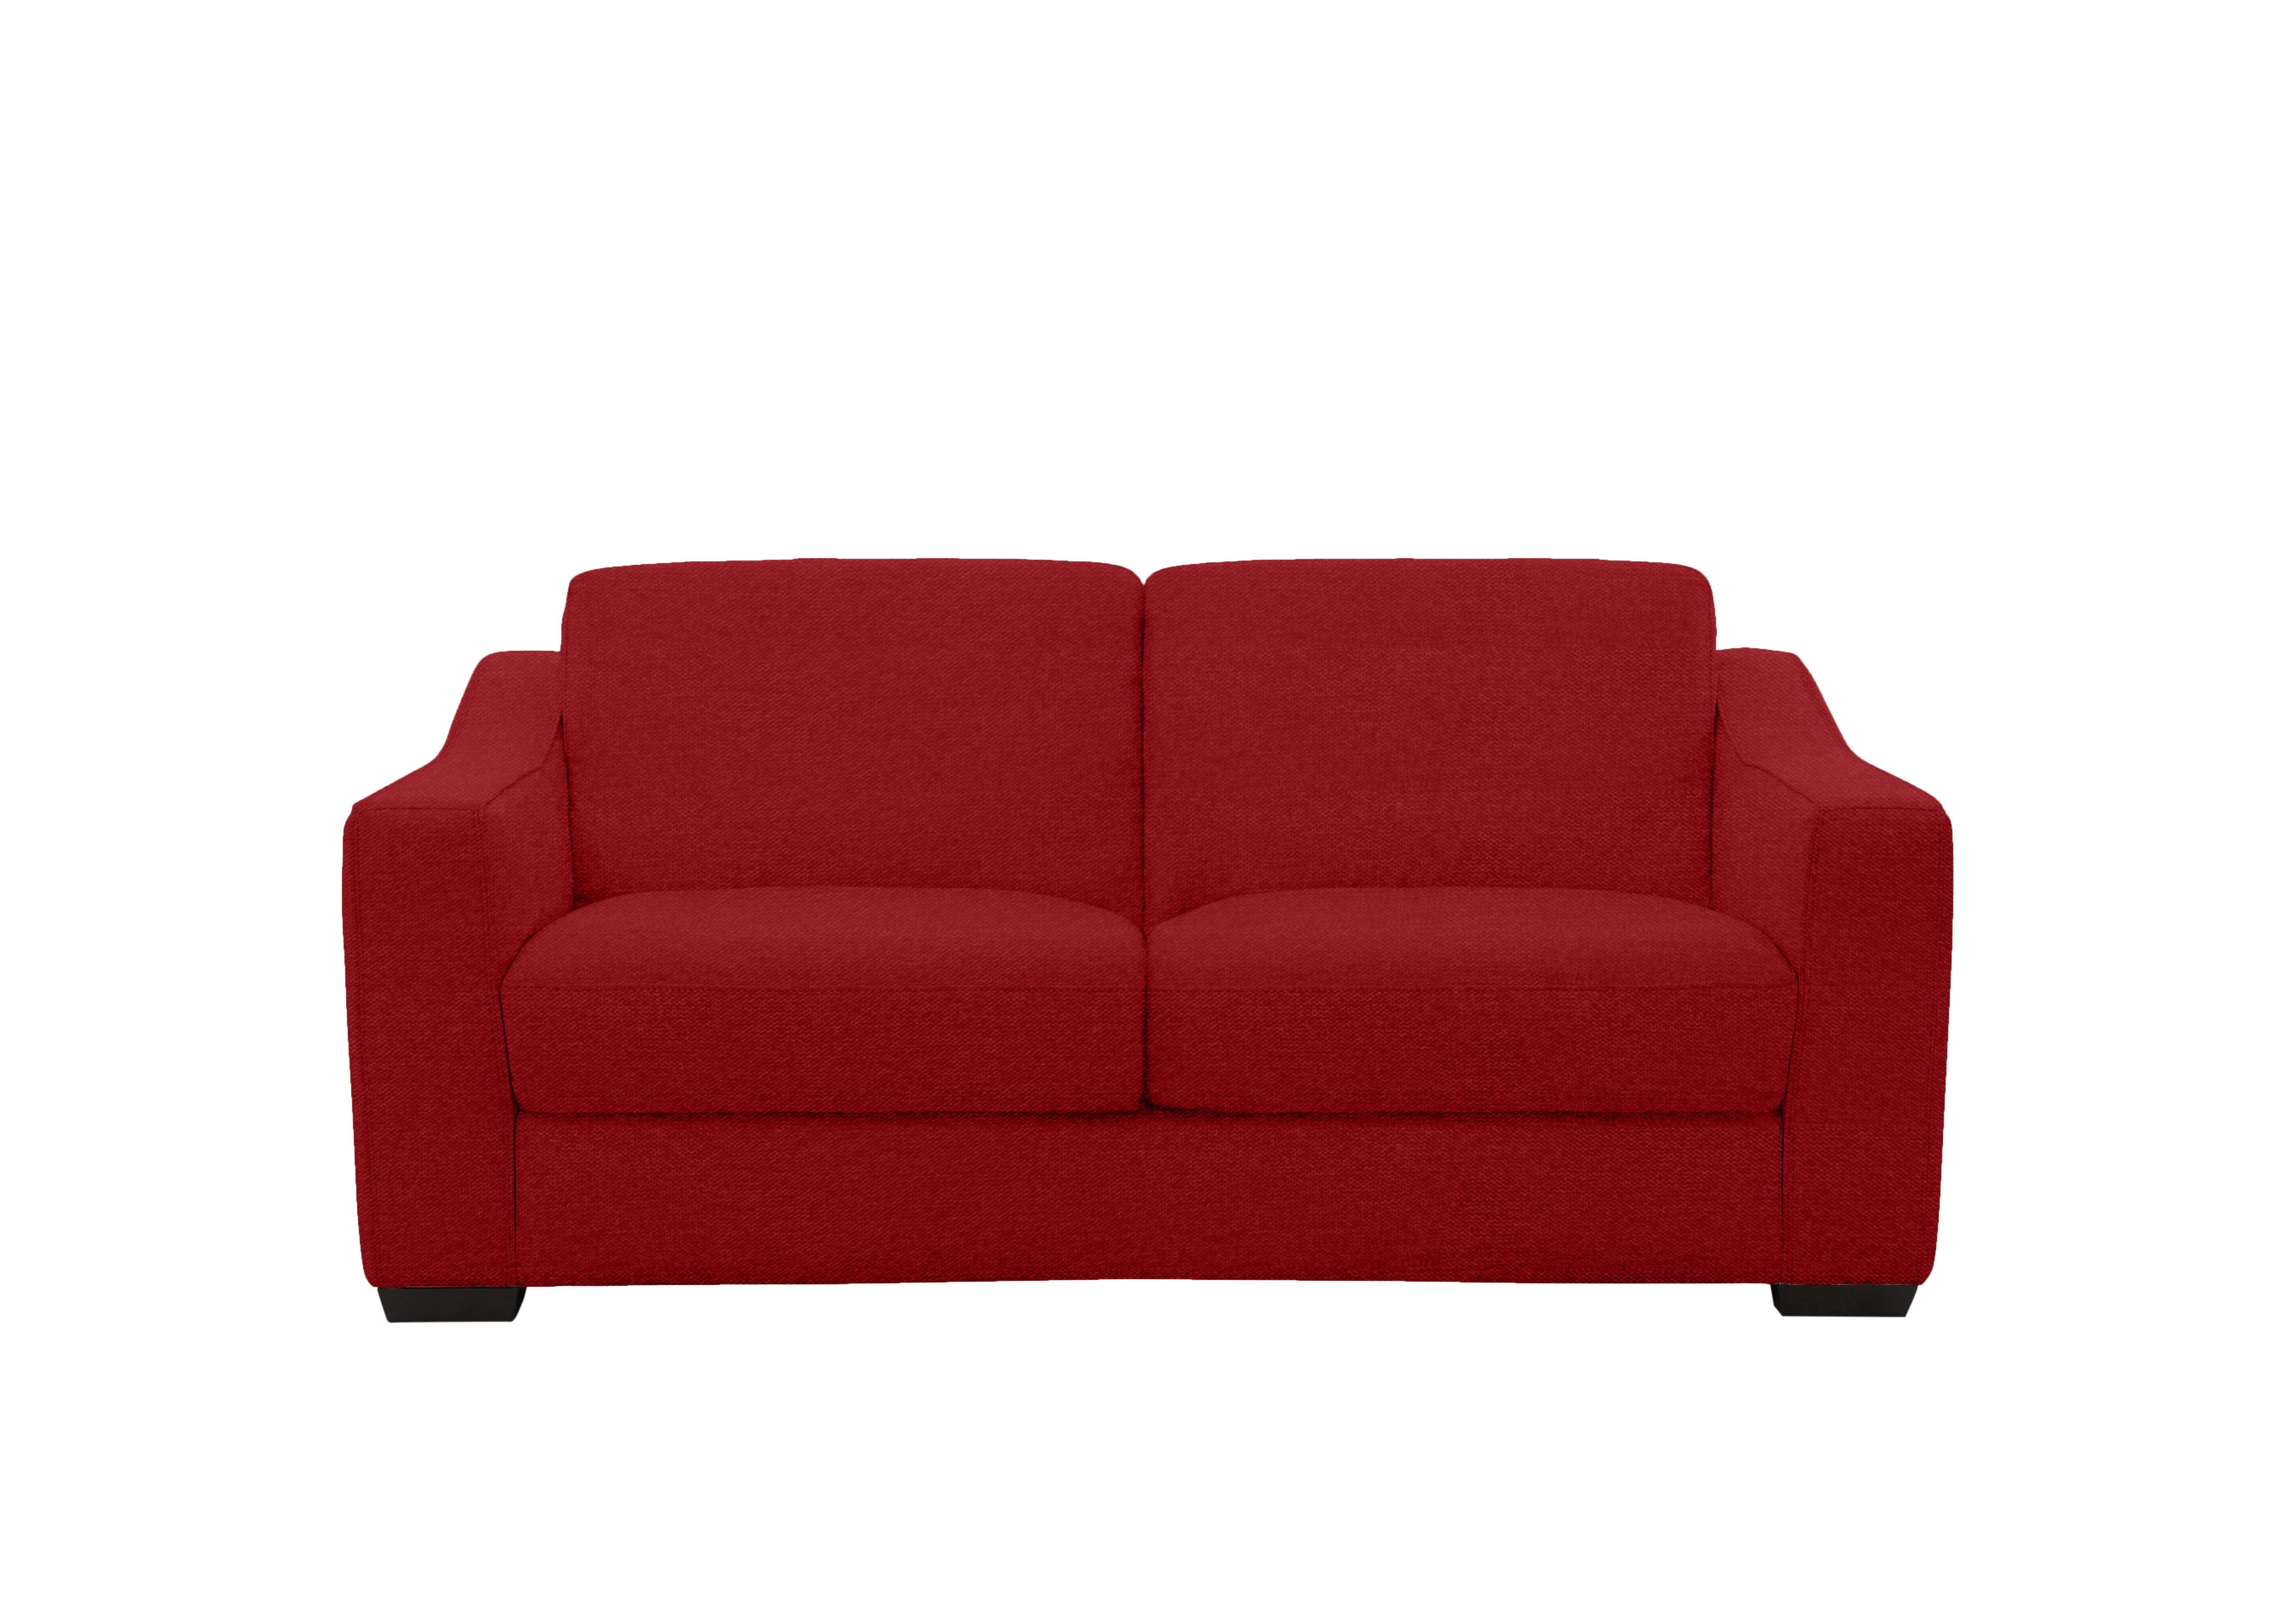 Optimus 2 Seater Fabric Sofa in Fab-Blt-R29 Red on Furniture Village